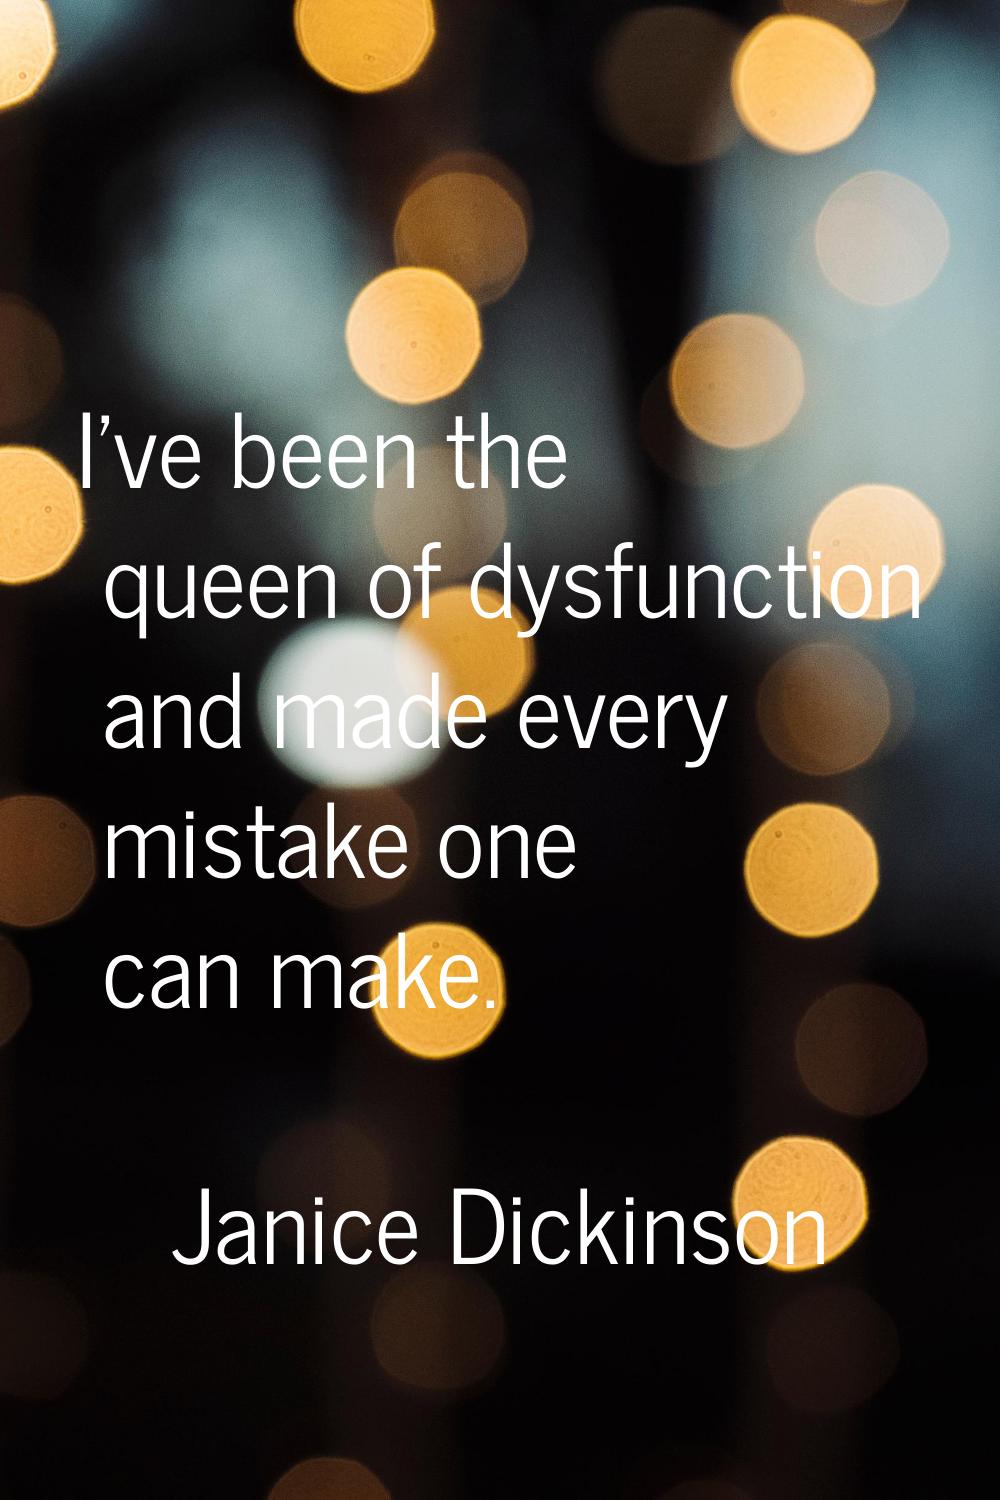 I've been the queen of dysfunction and made every mistake one can make.